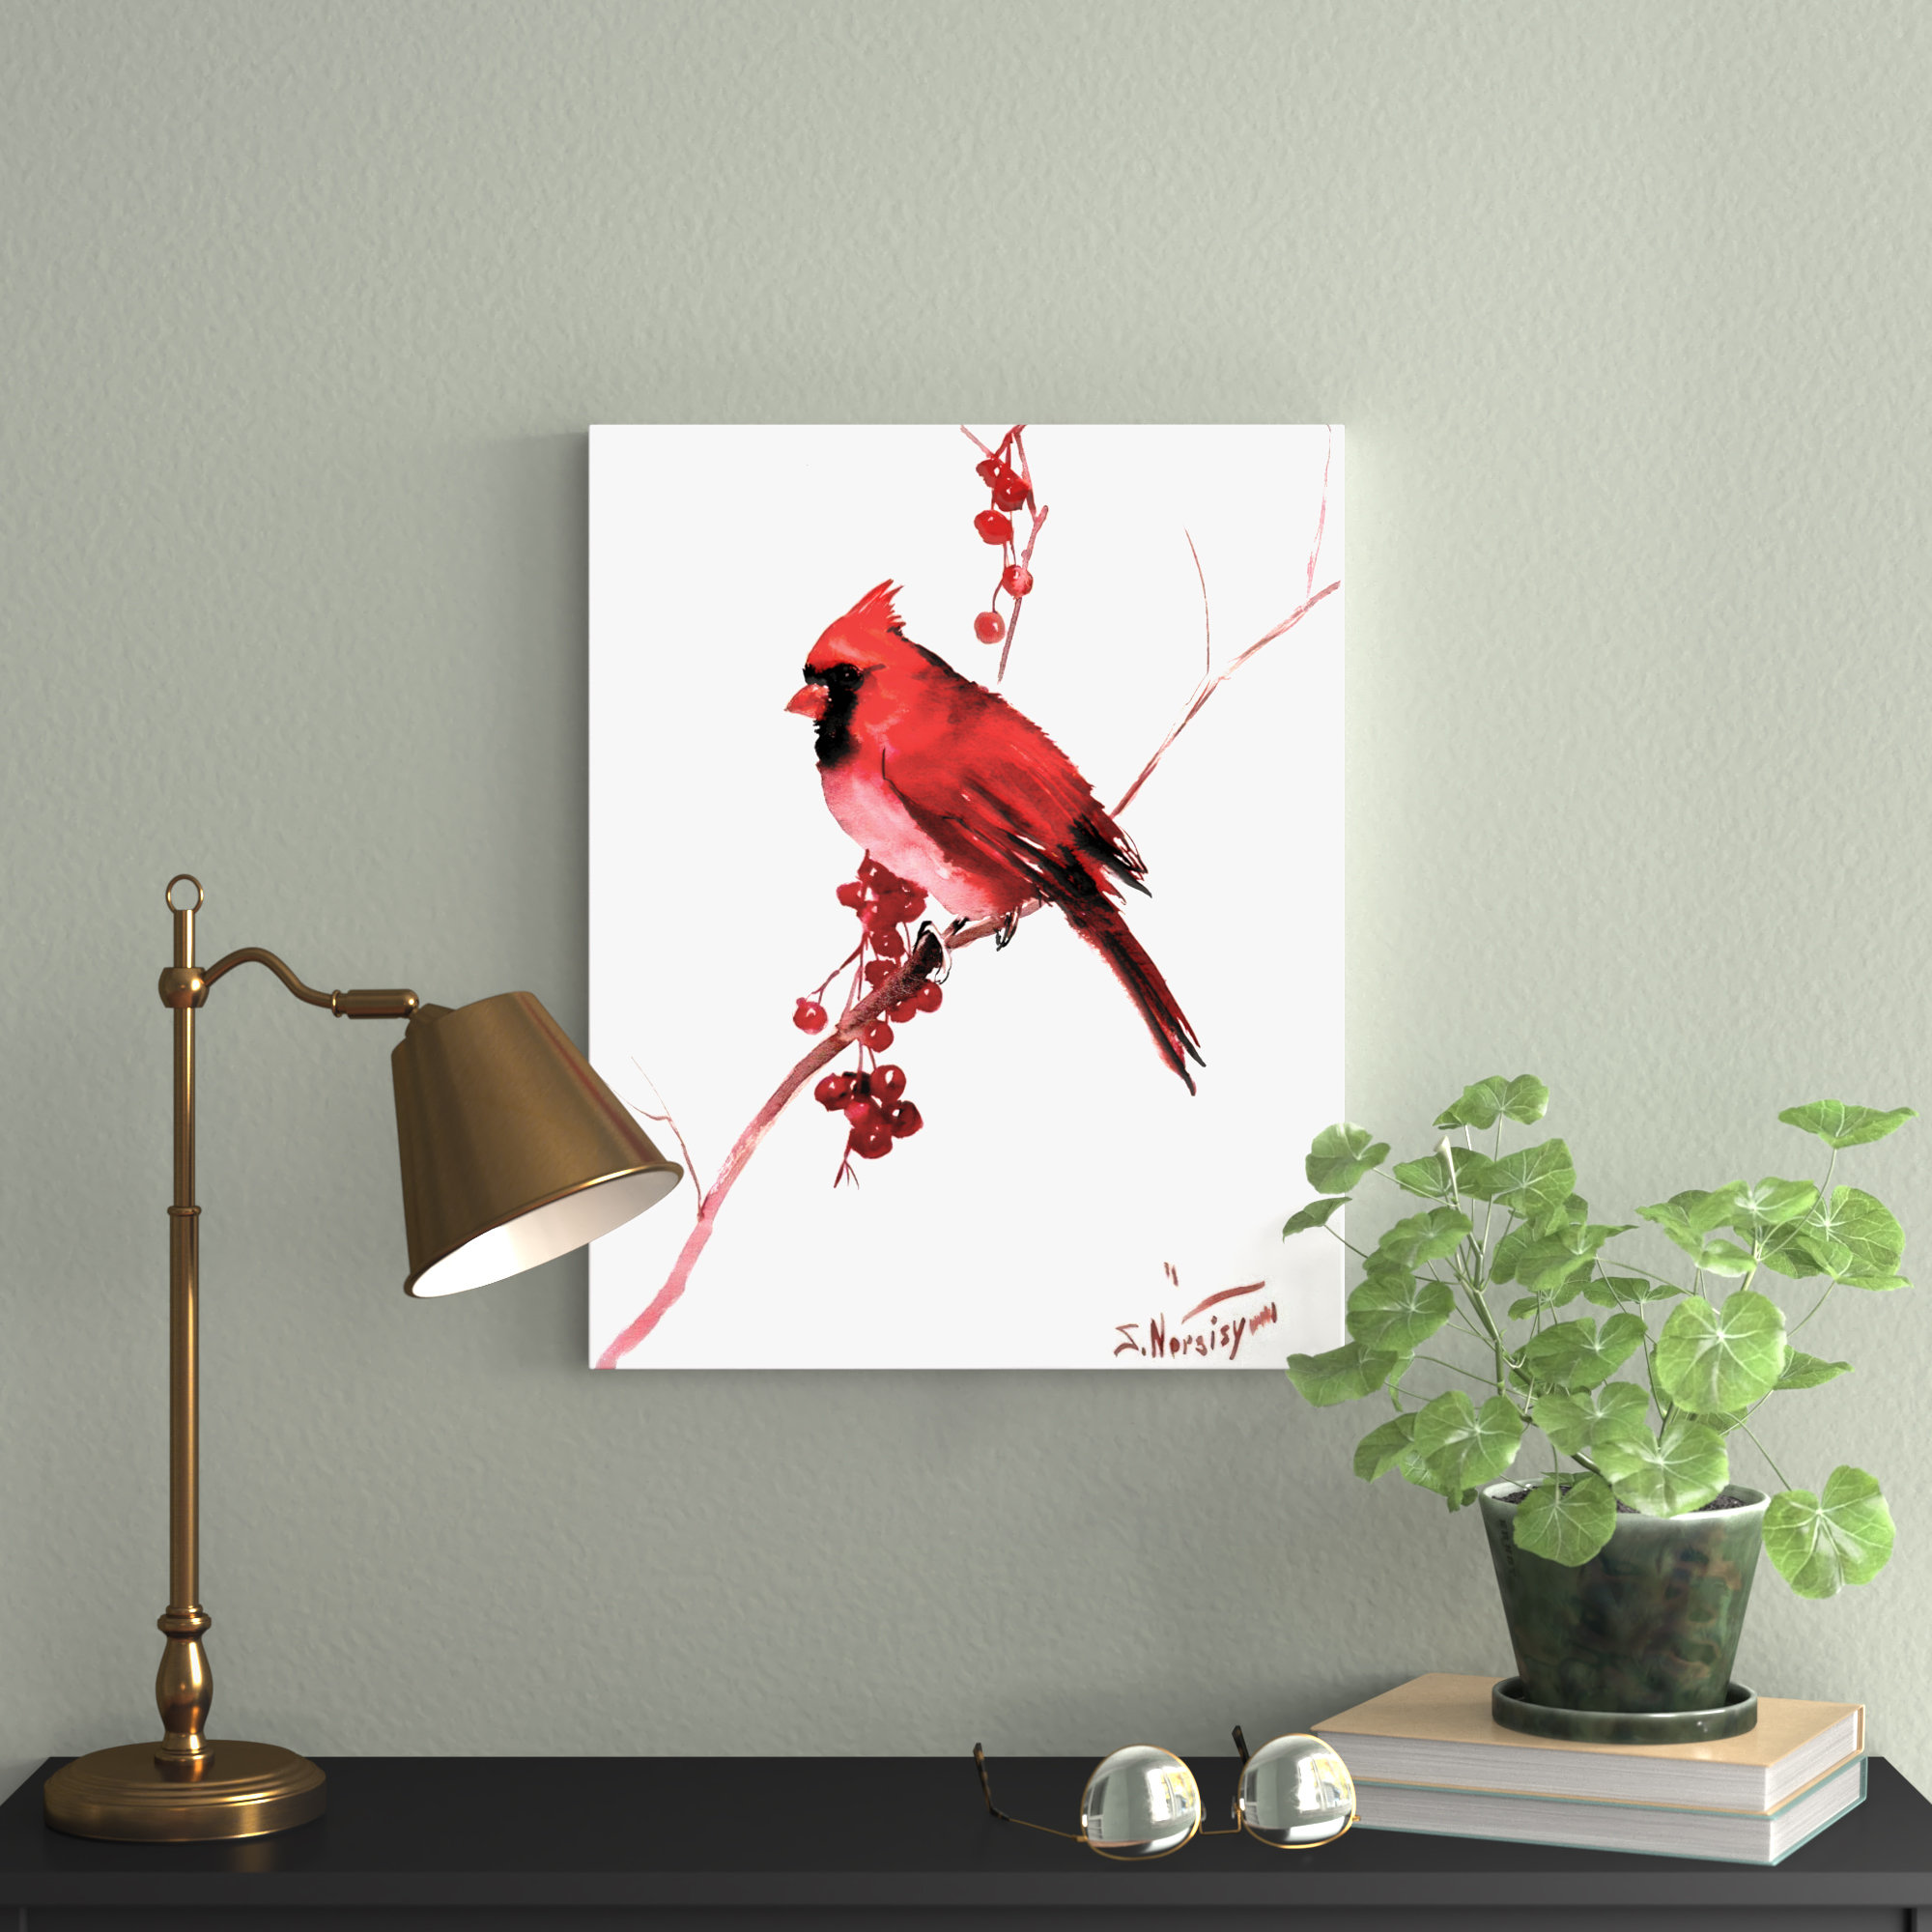 Alcott Hill 'Red Cardinal Bird' Painting Print On Gallery Wrapped Canvas Size: 24 H x 20 W x 1.5 D